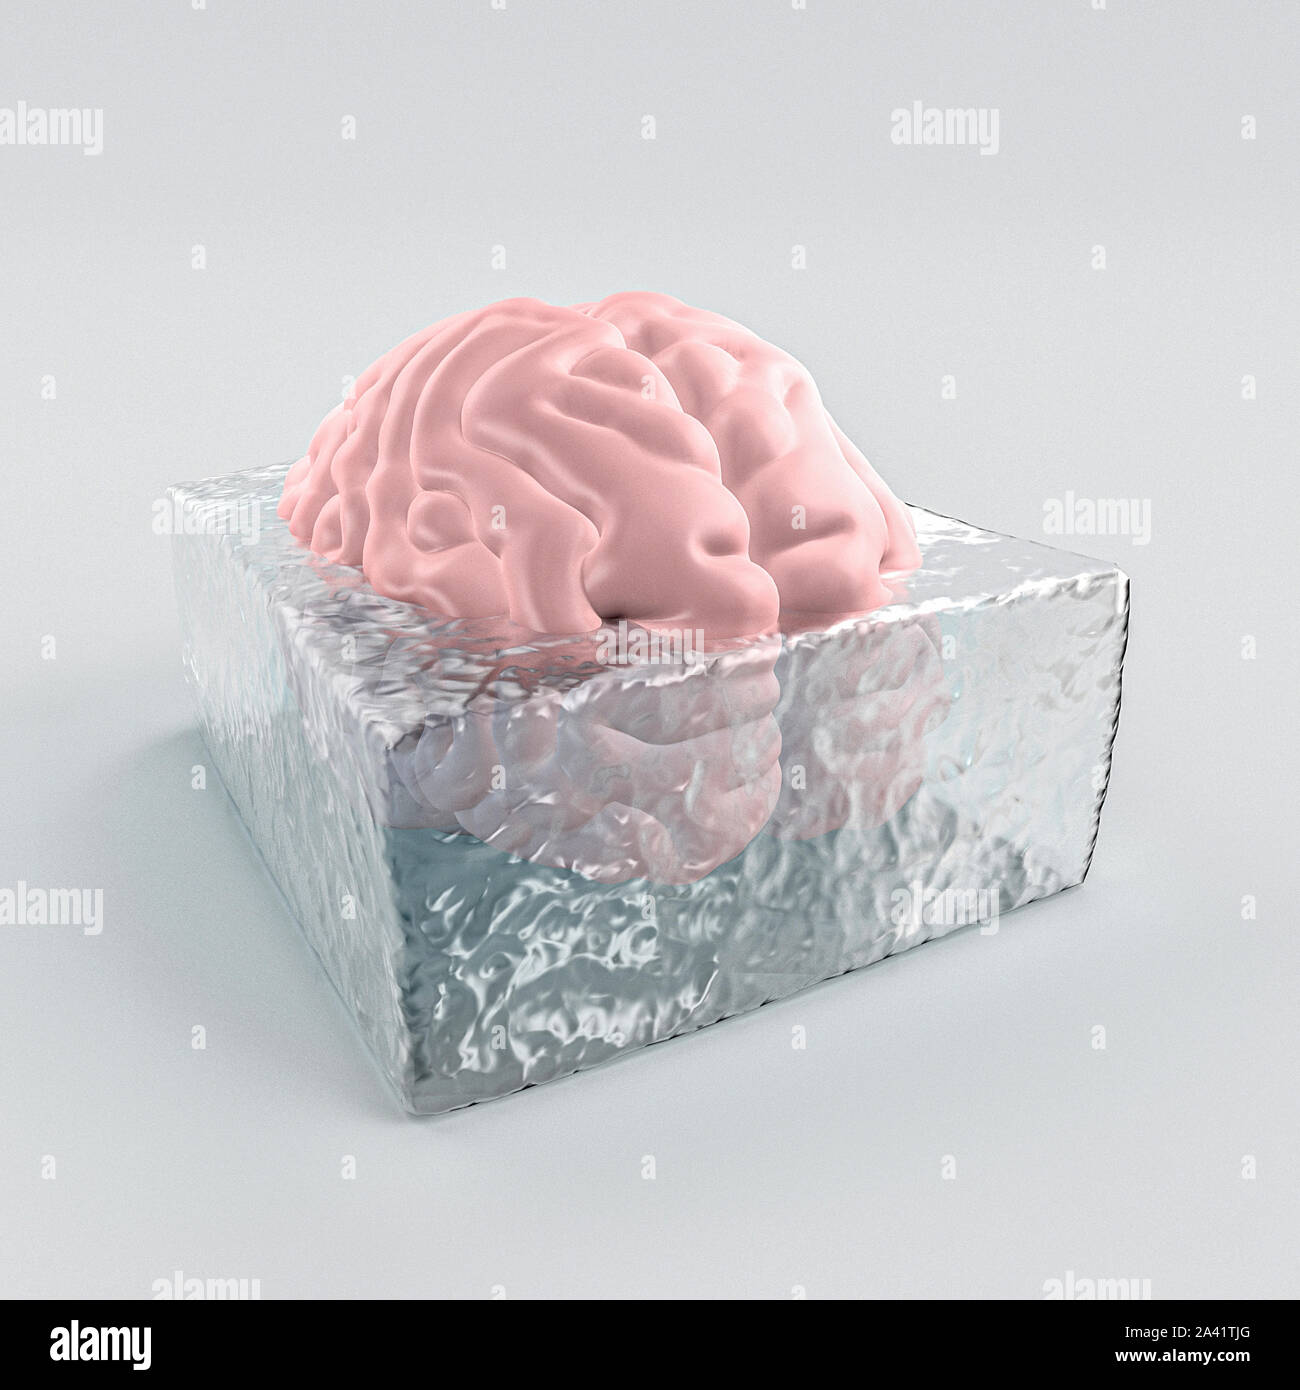 3d image of a human brain frozen in a block of ice. Concept of mental illness and little creativity. Stock Photo